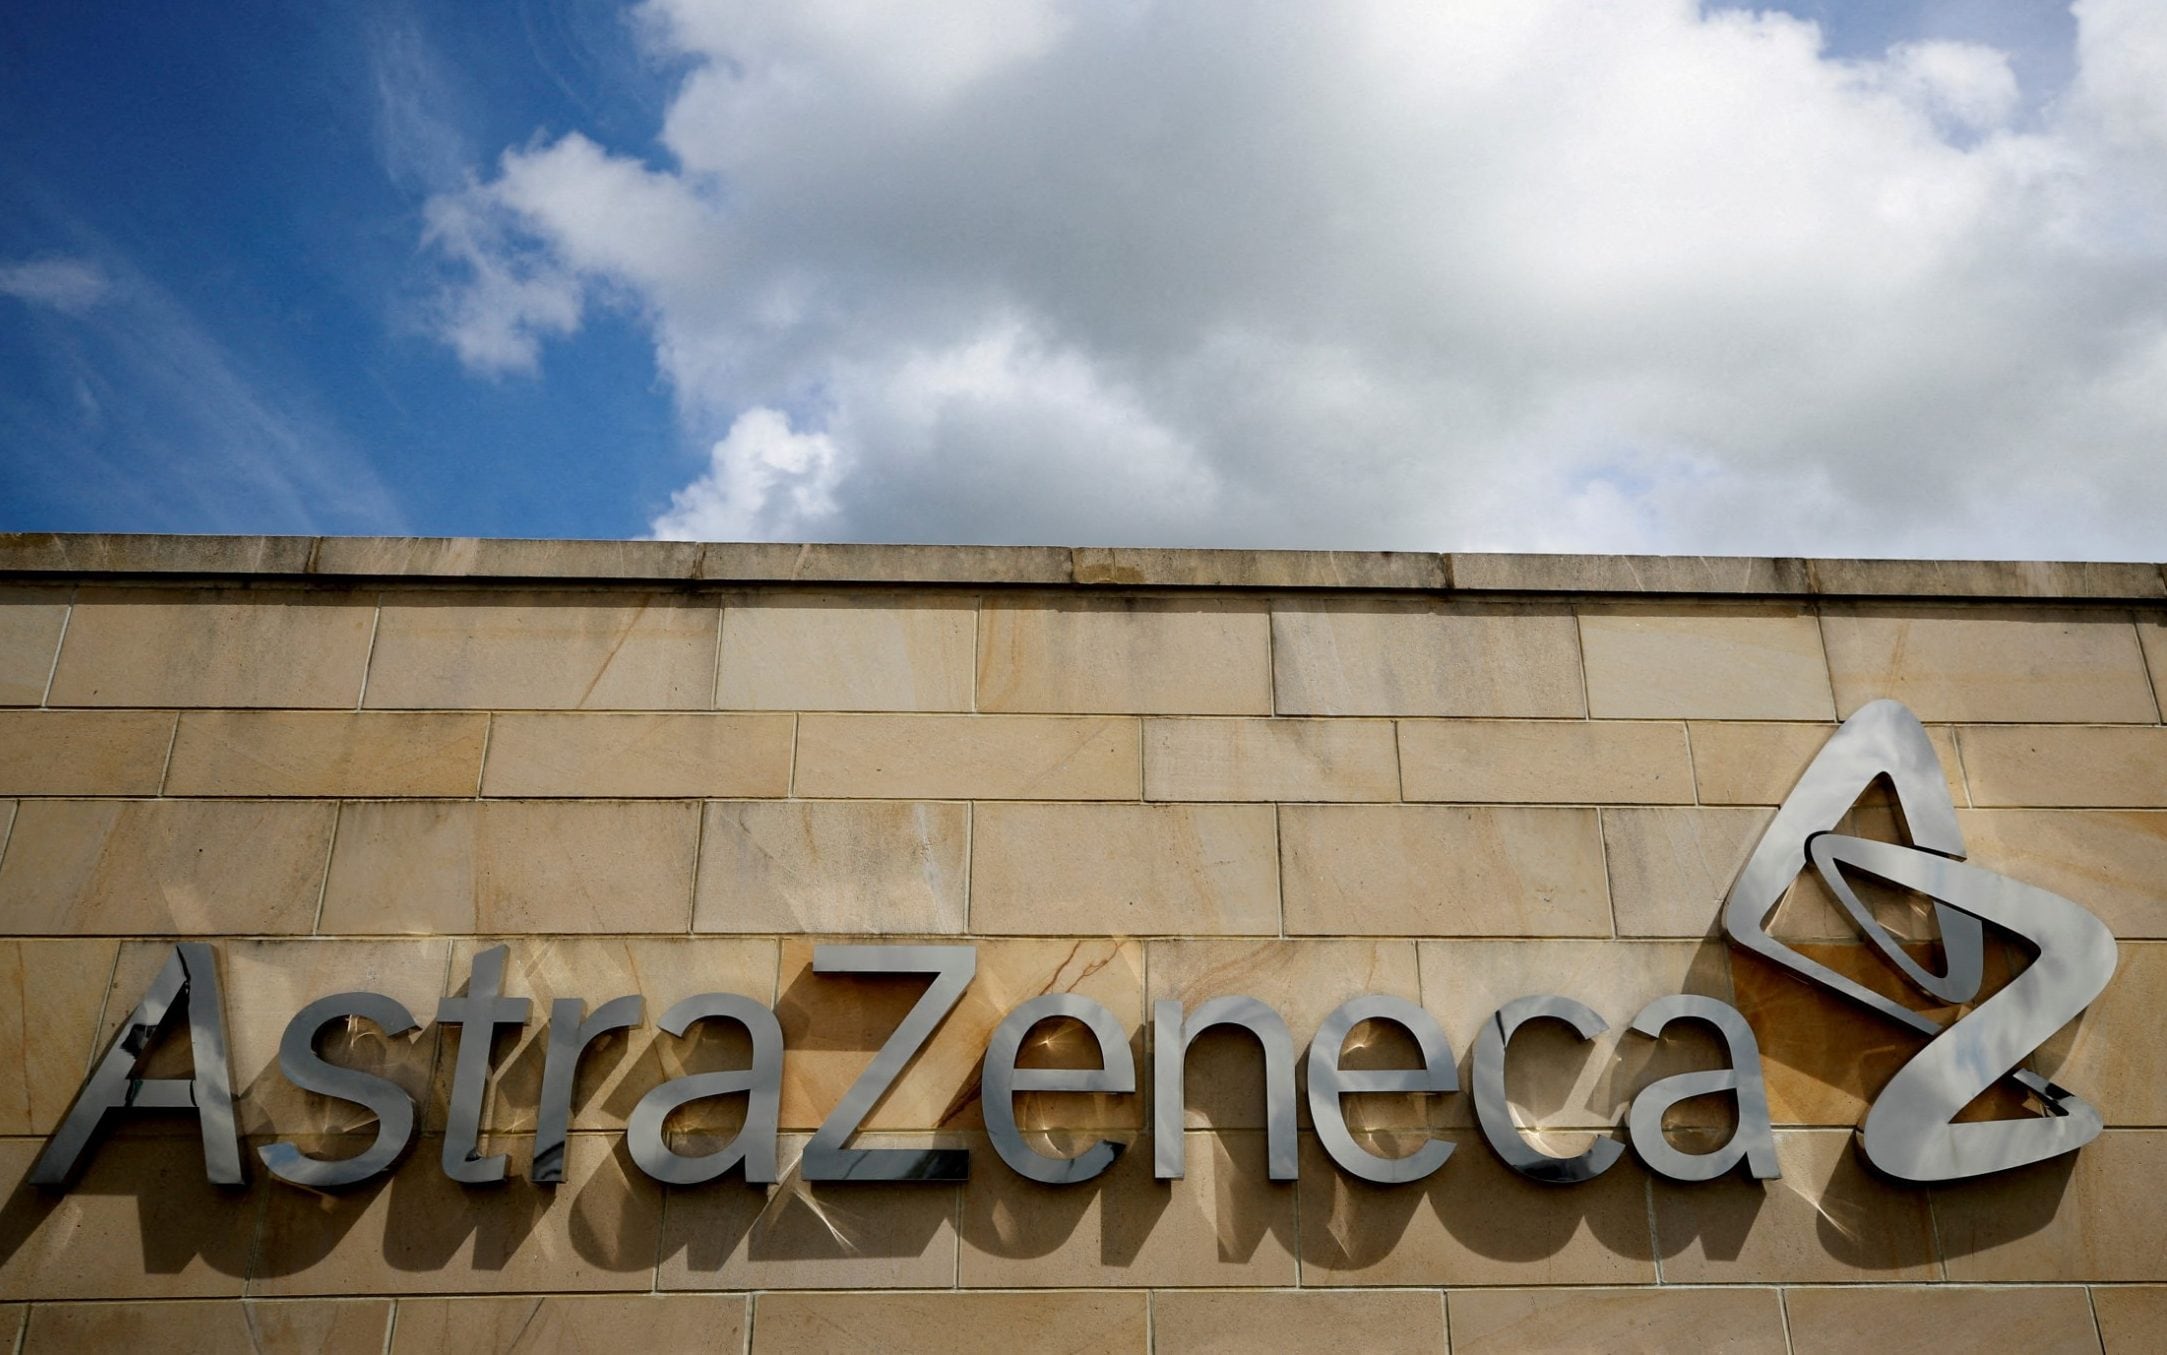 astrazeneca snaps up rival to develop pioneering new cancer treatment